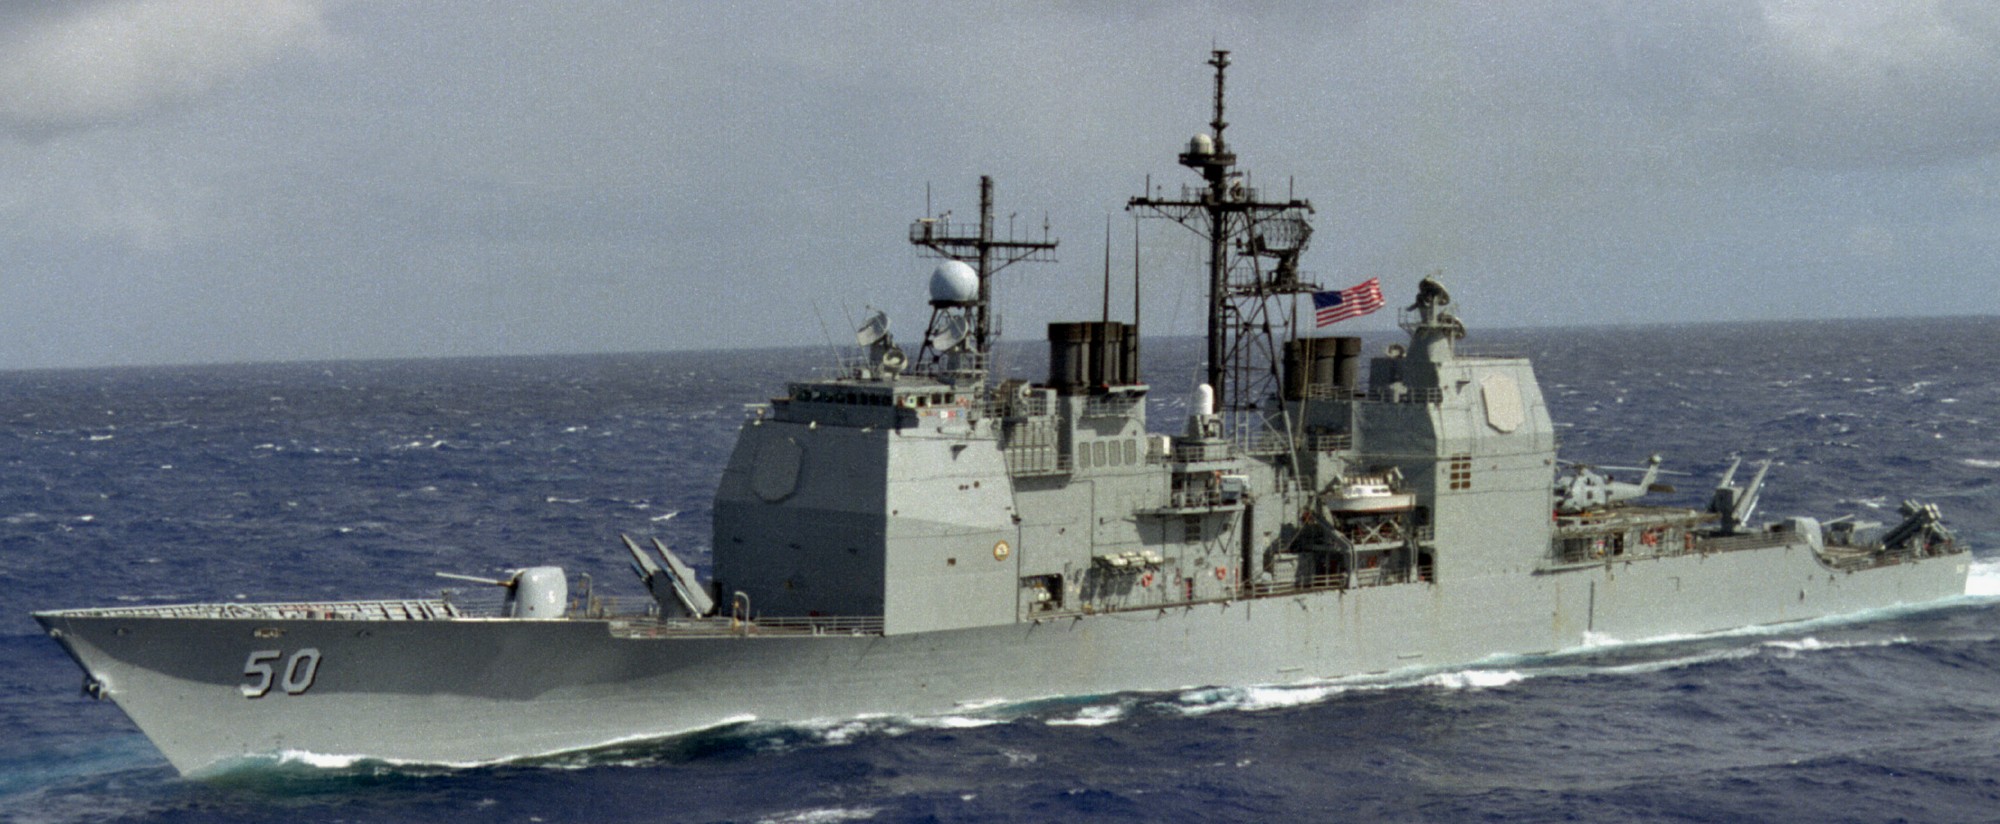 cg-50 uss valley forge ticonderoga class guided missile cruiser aegis us navy 41